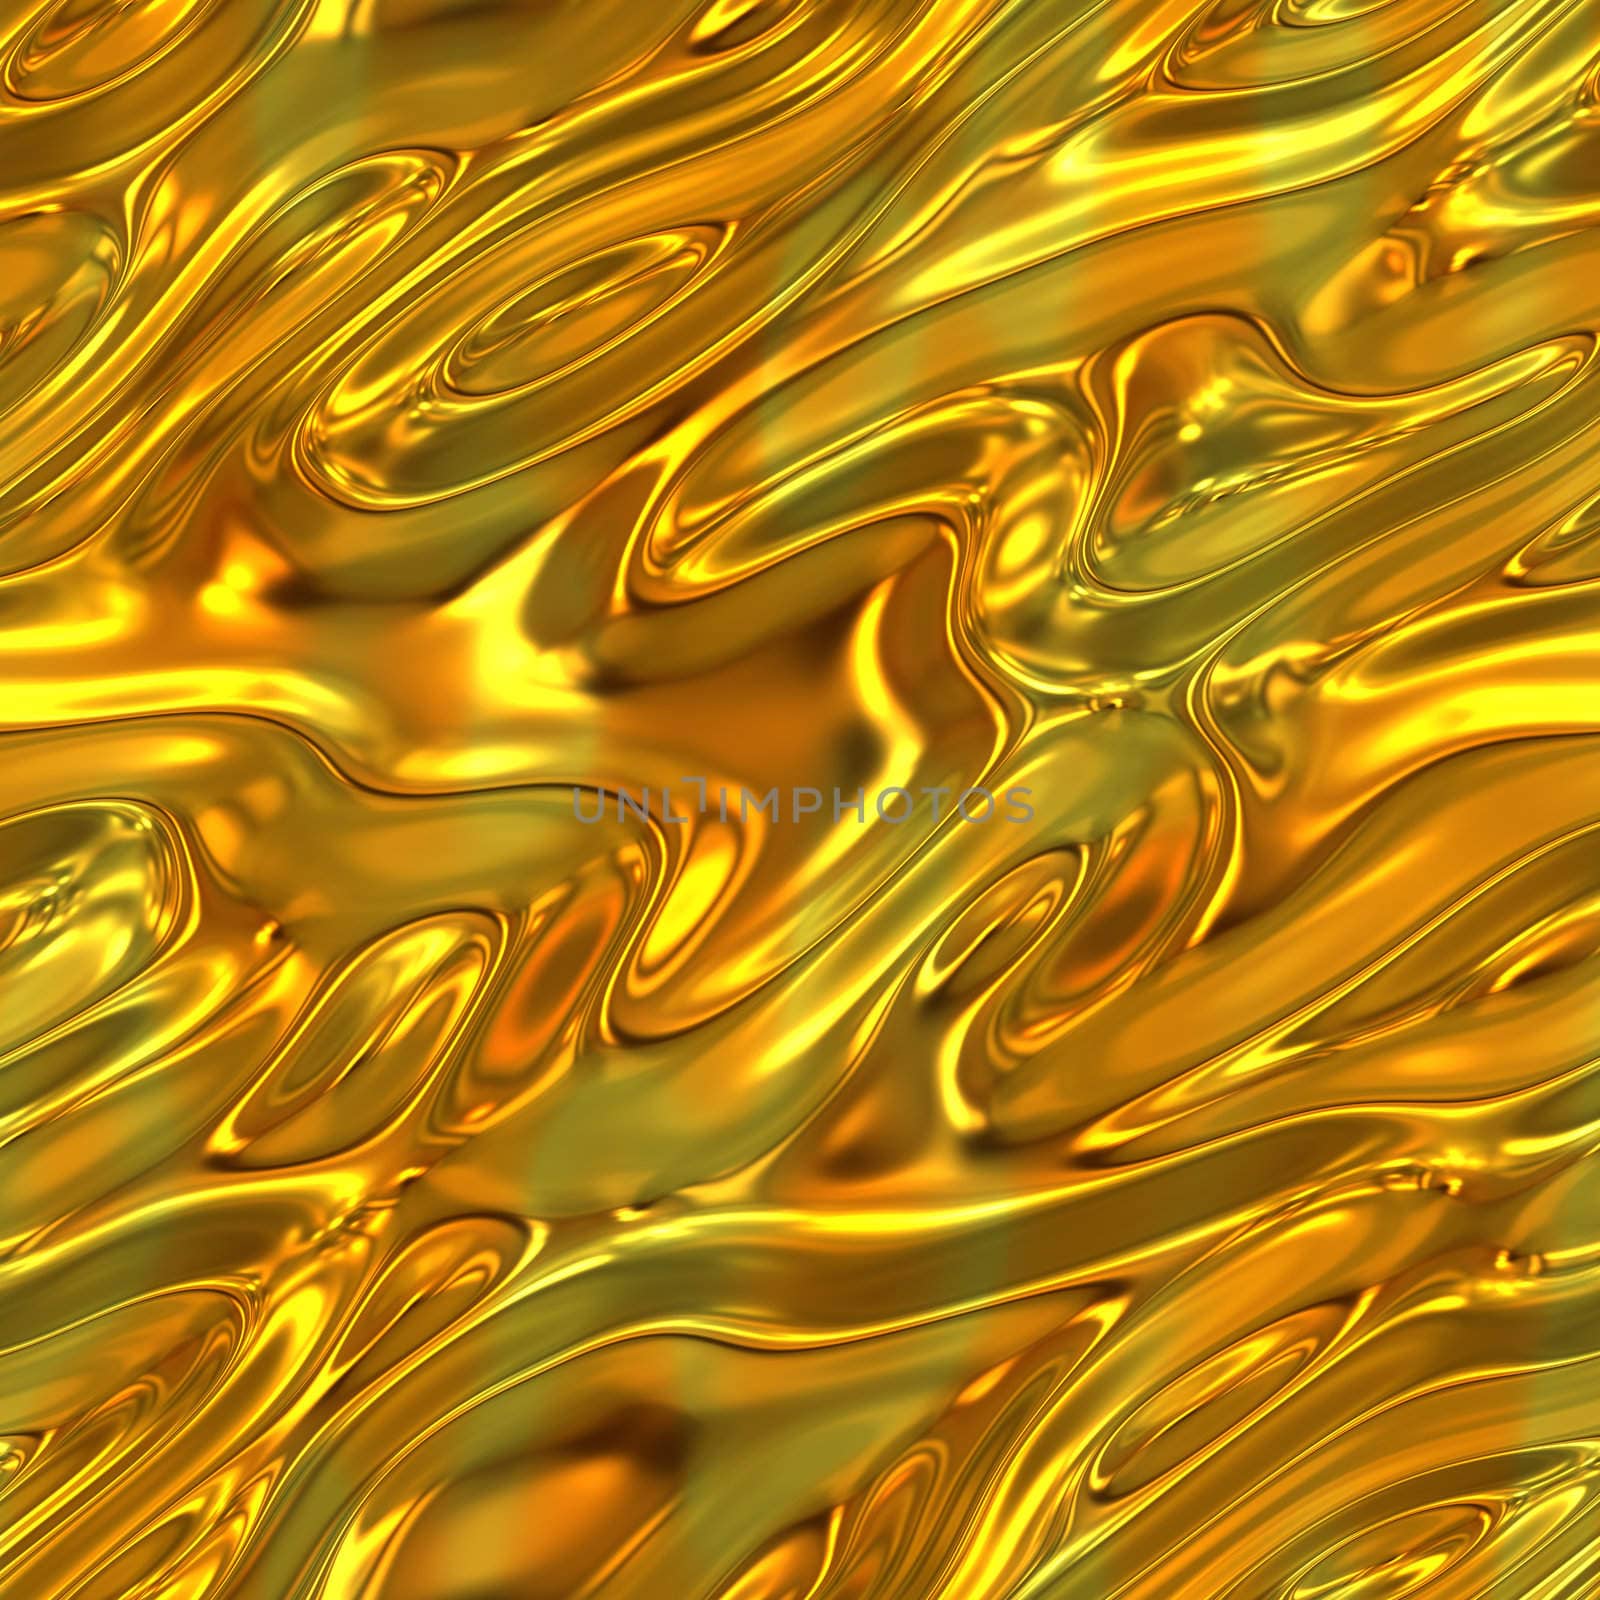 a large image of liquid or molten flowing gold